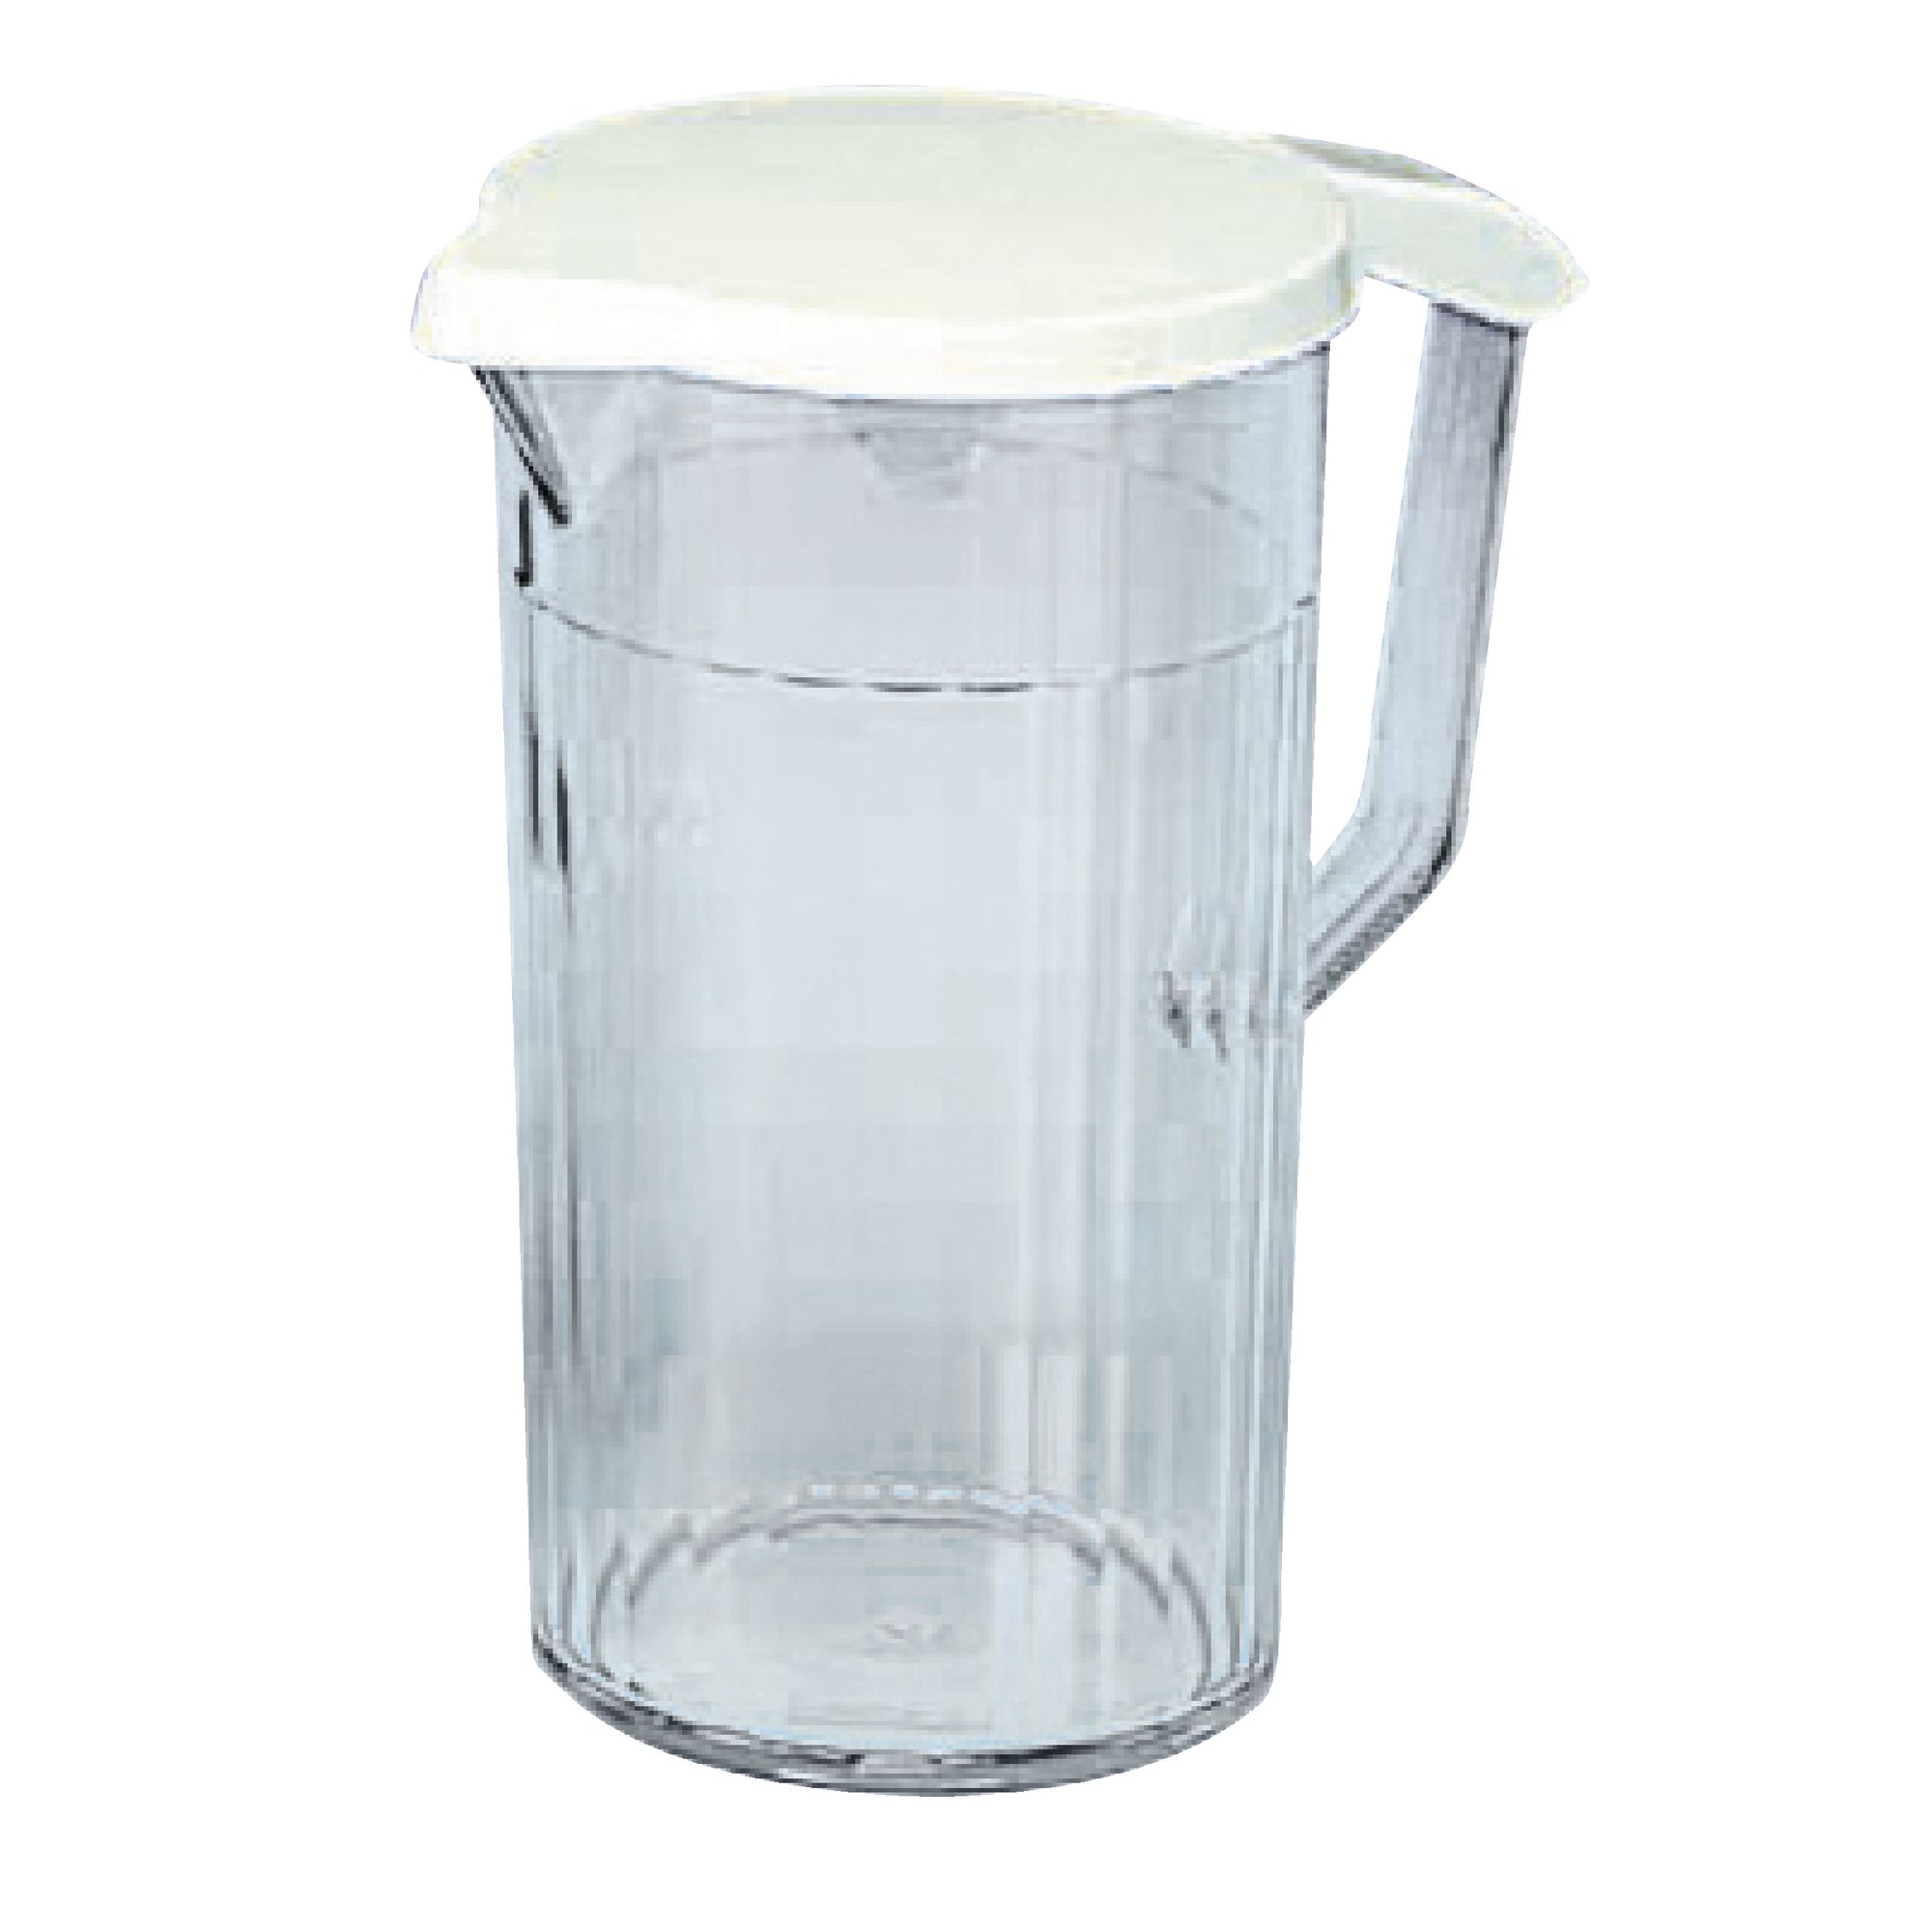 HC277439 - Harfield Clear Plastic Jug and Lid - 1.1 Litre